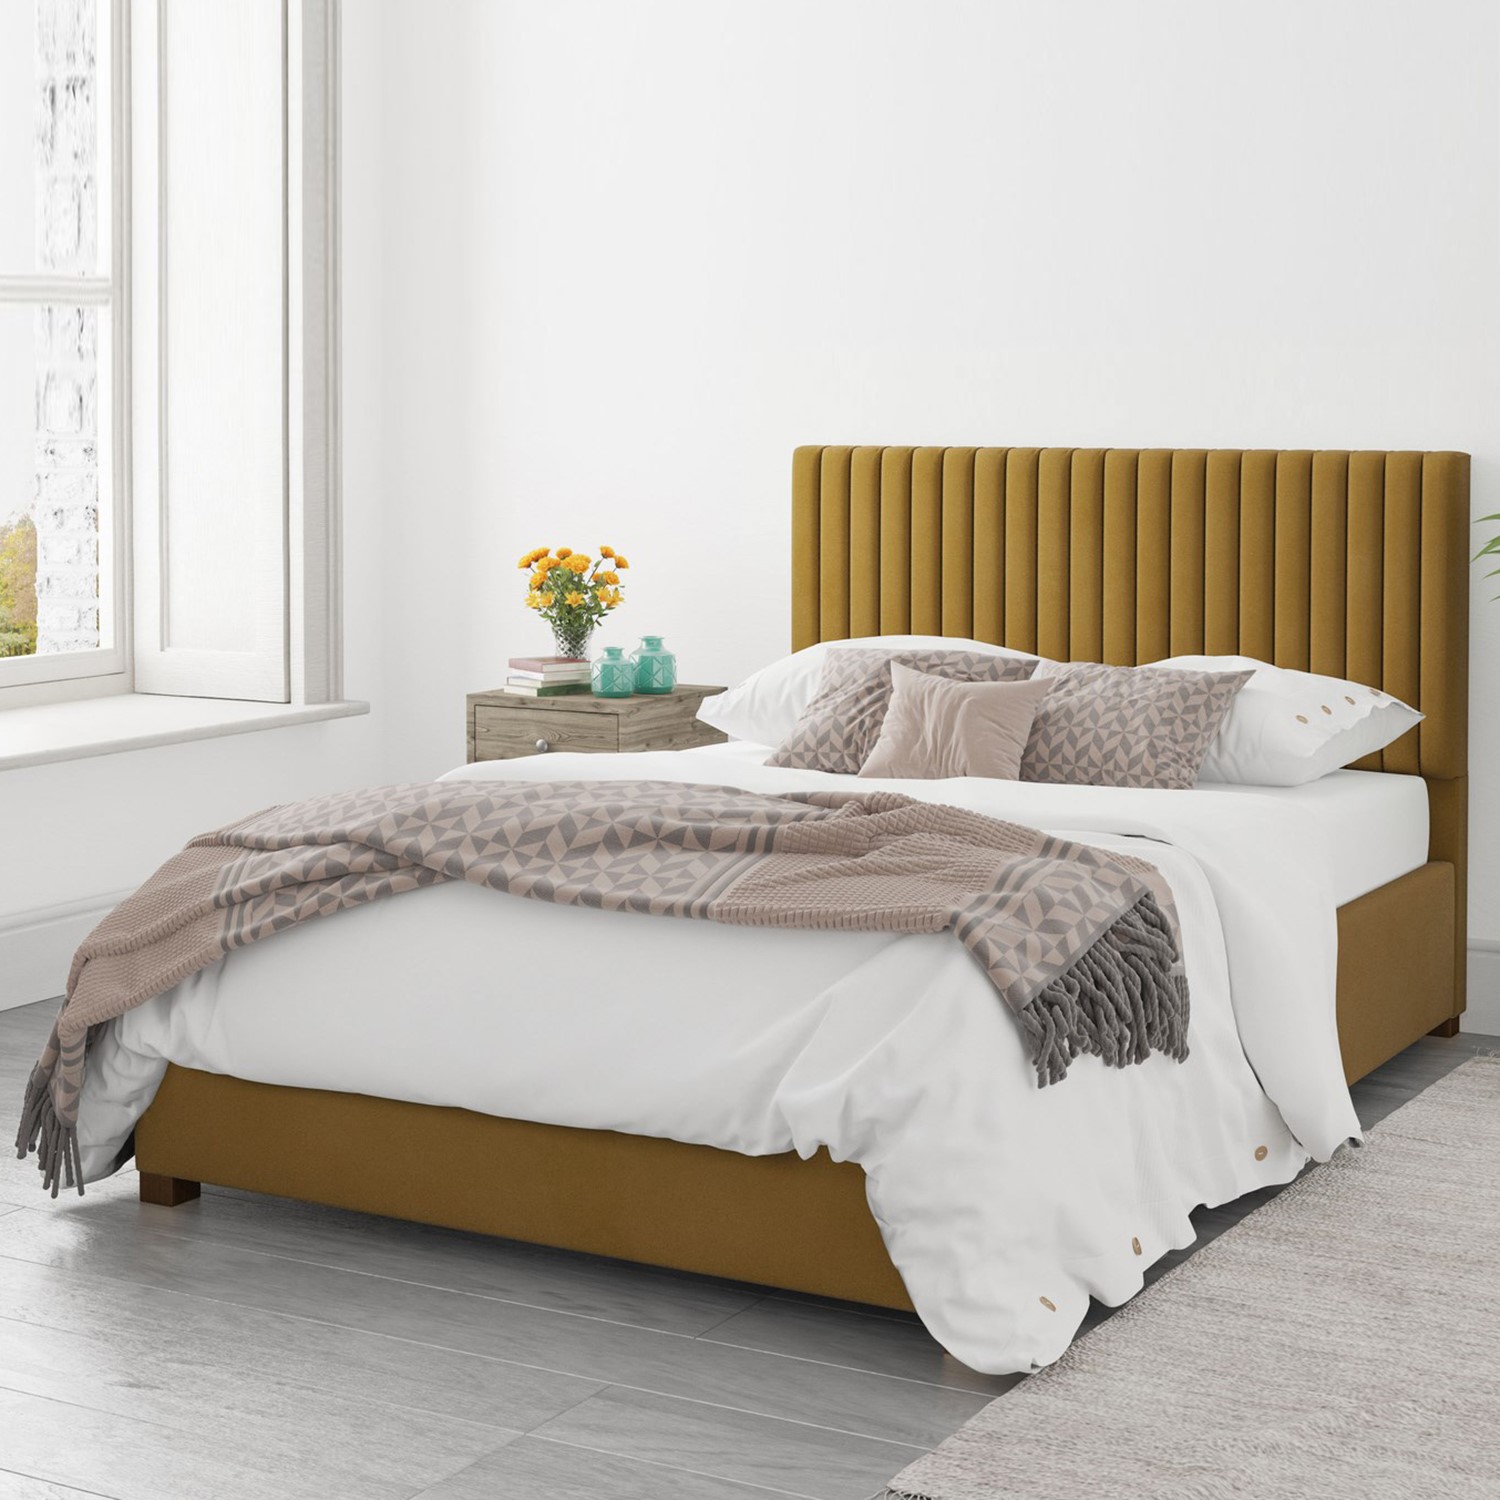 Read more about Mustard velvet king size ottoman bed piccadilly aspire